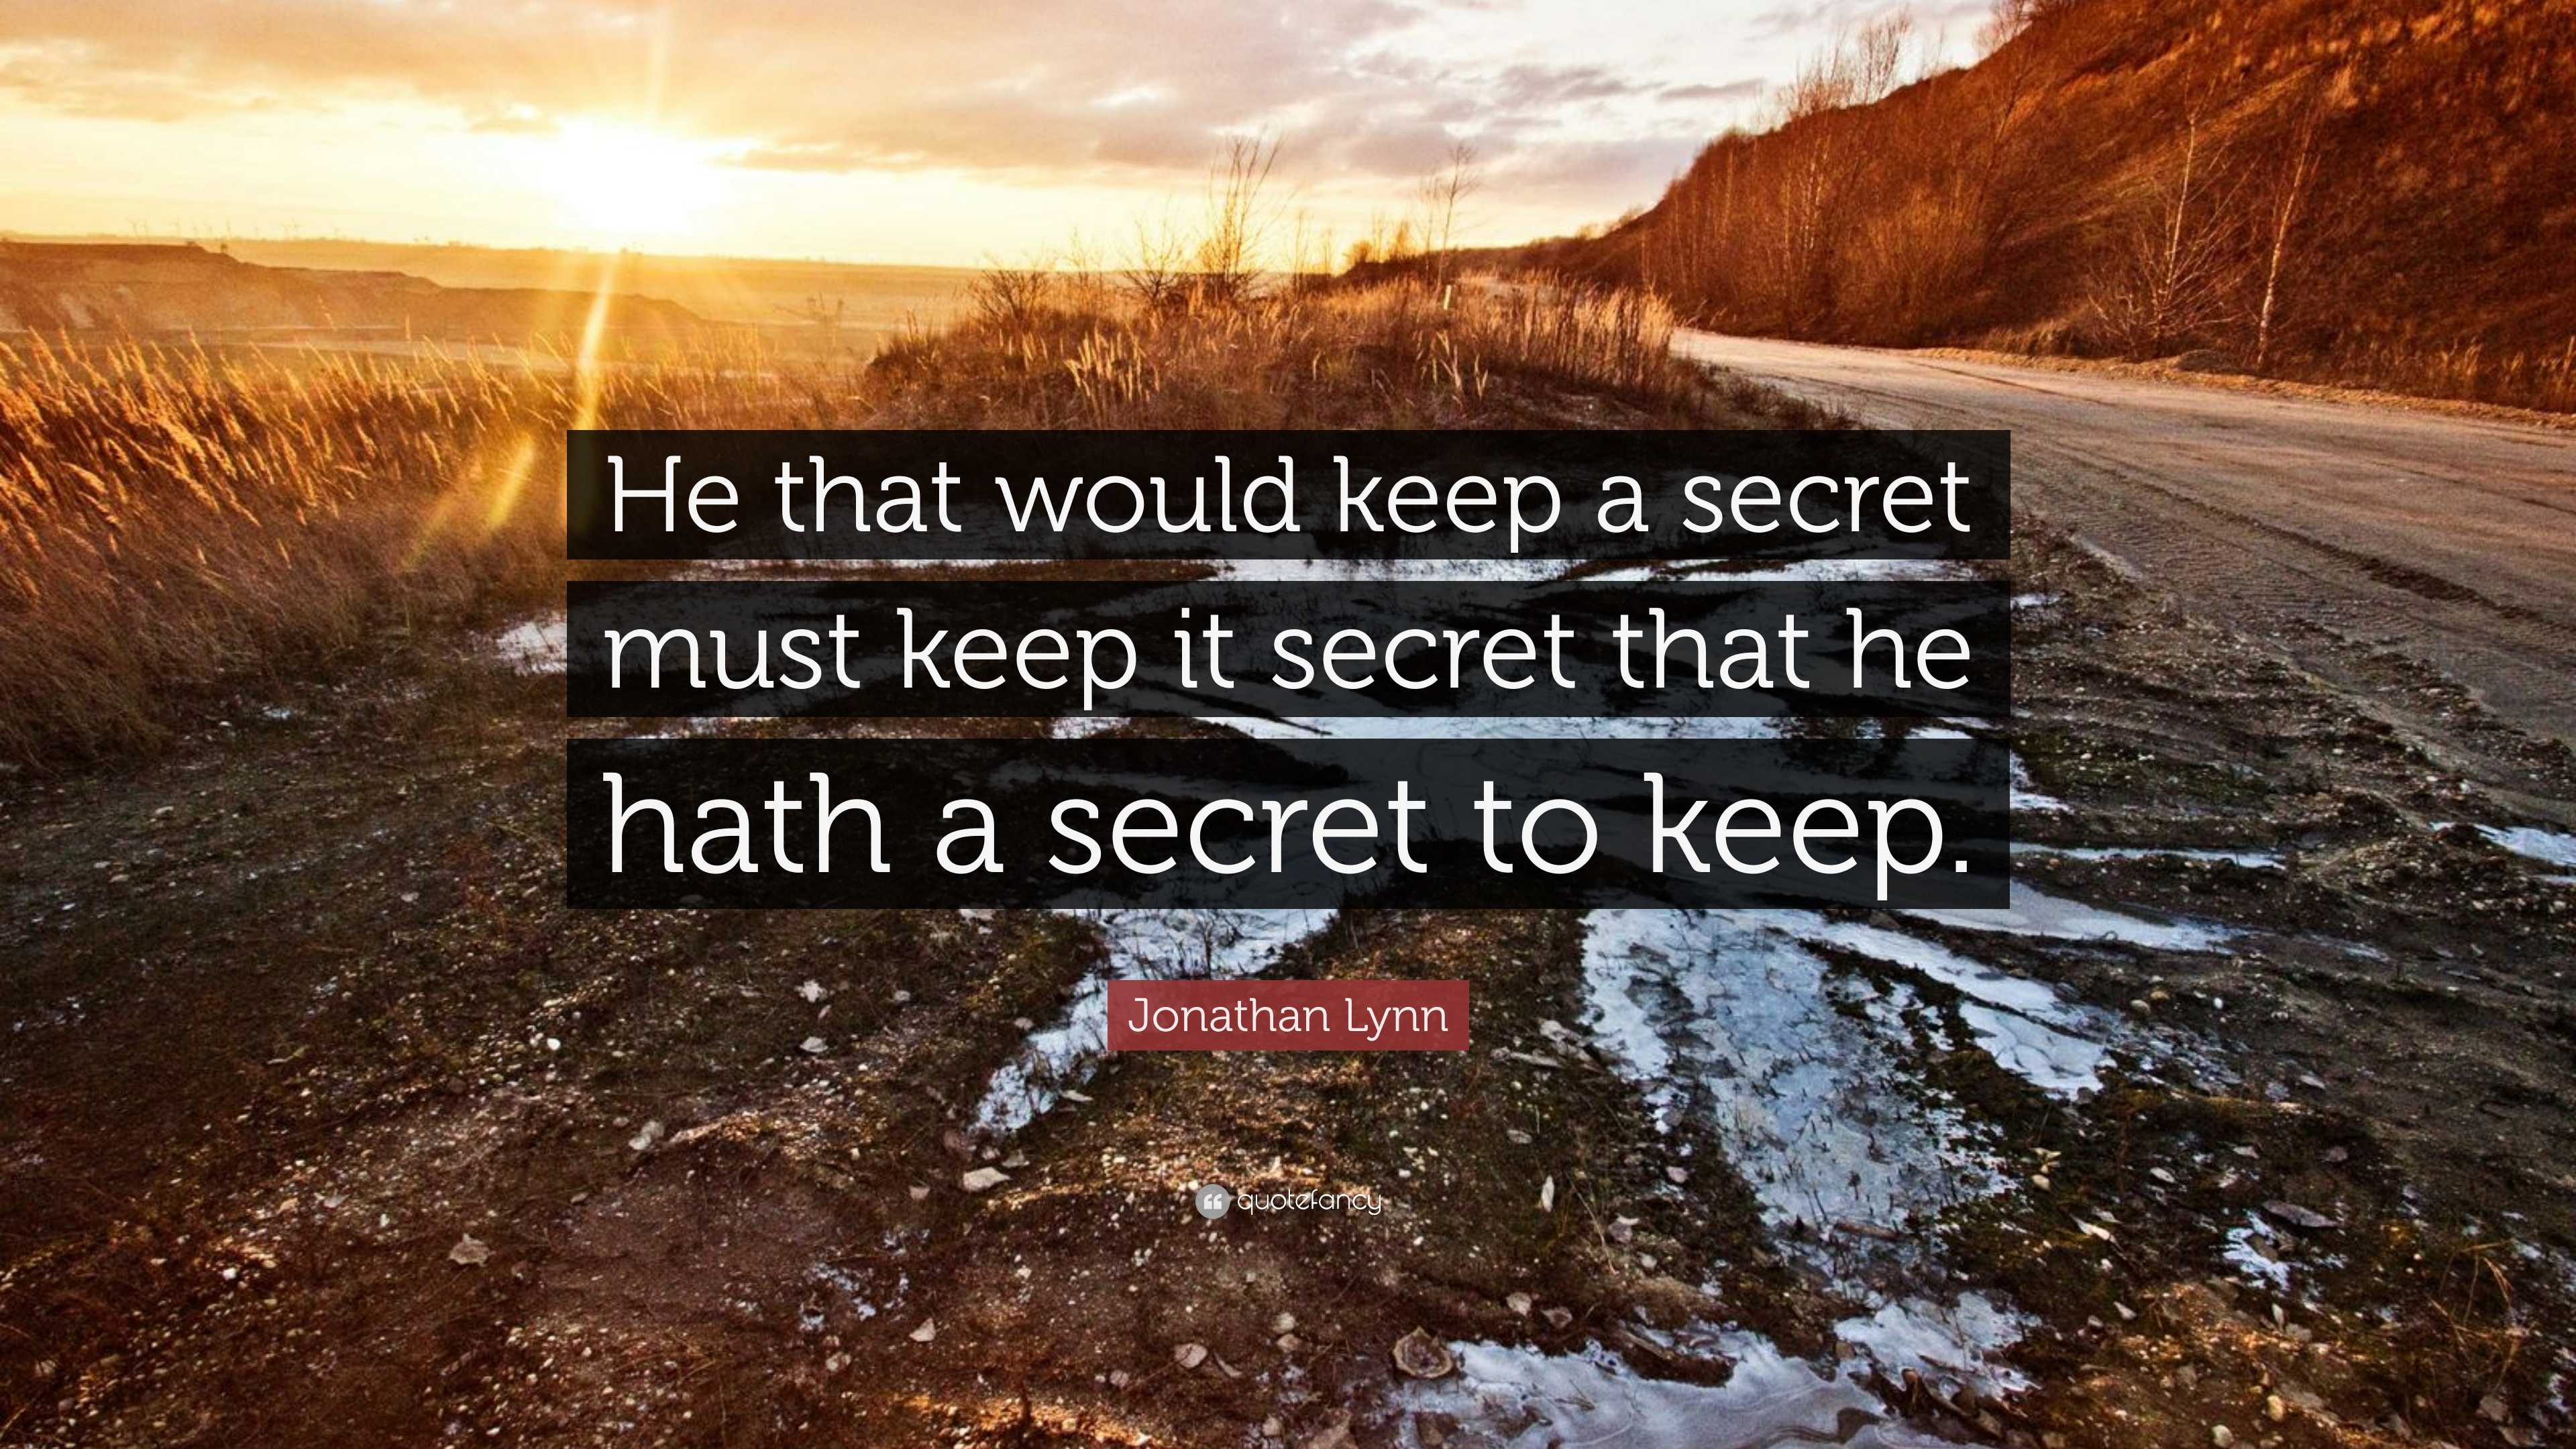 Why It's So Hard to Keep a Secret